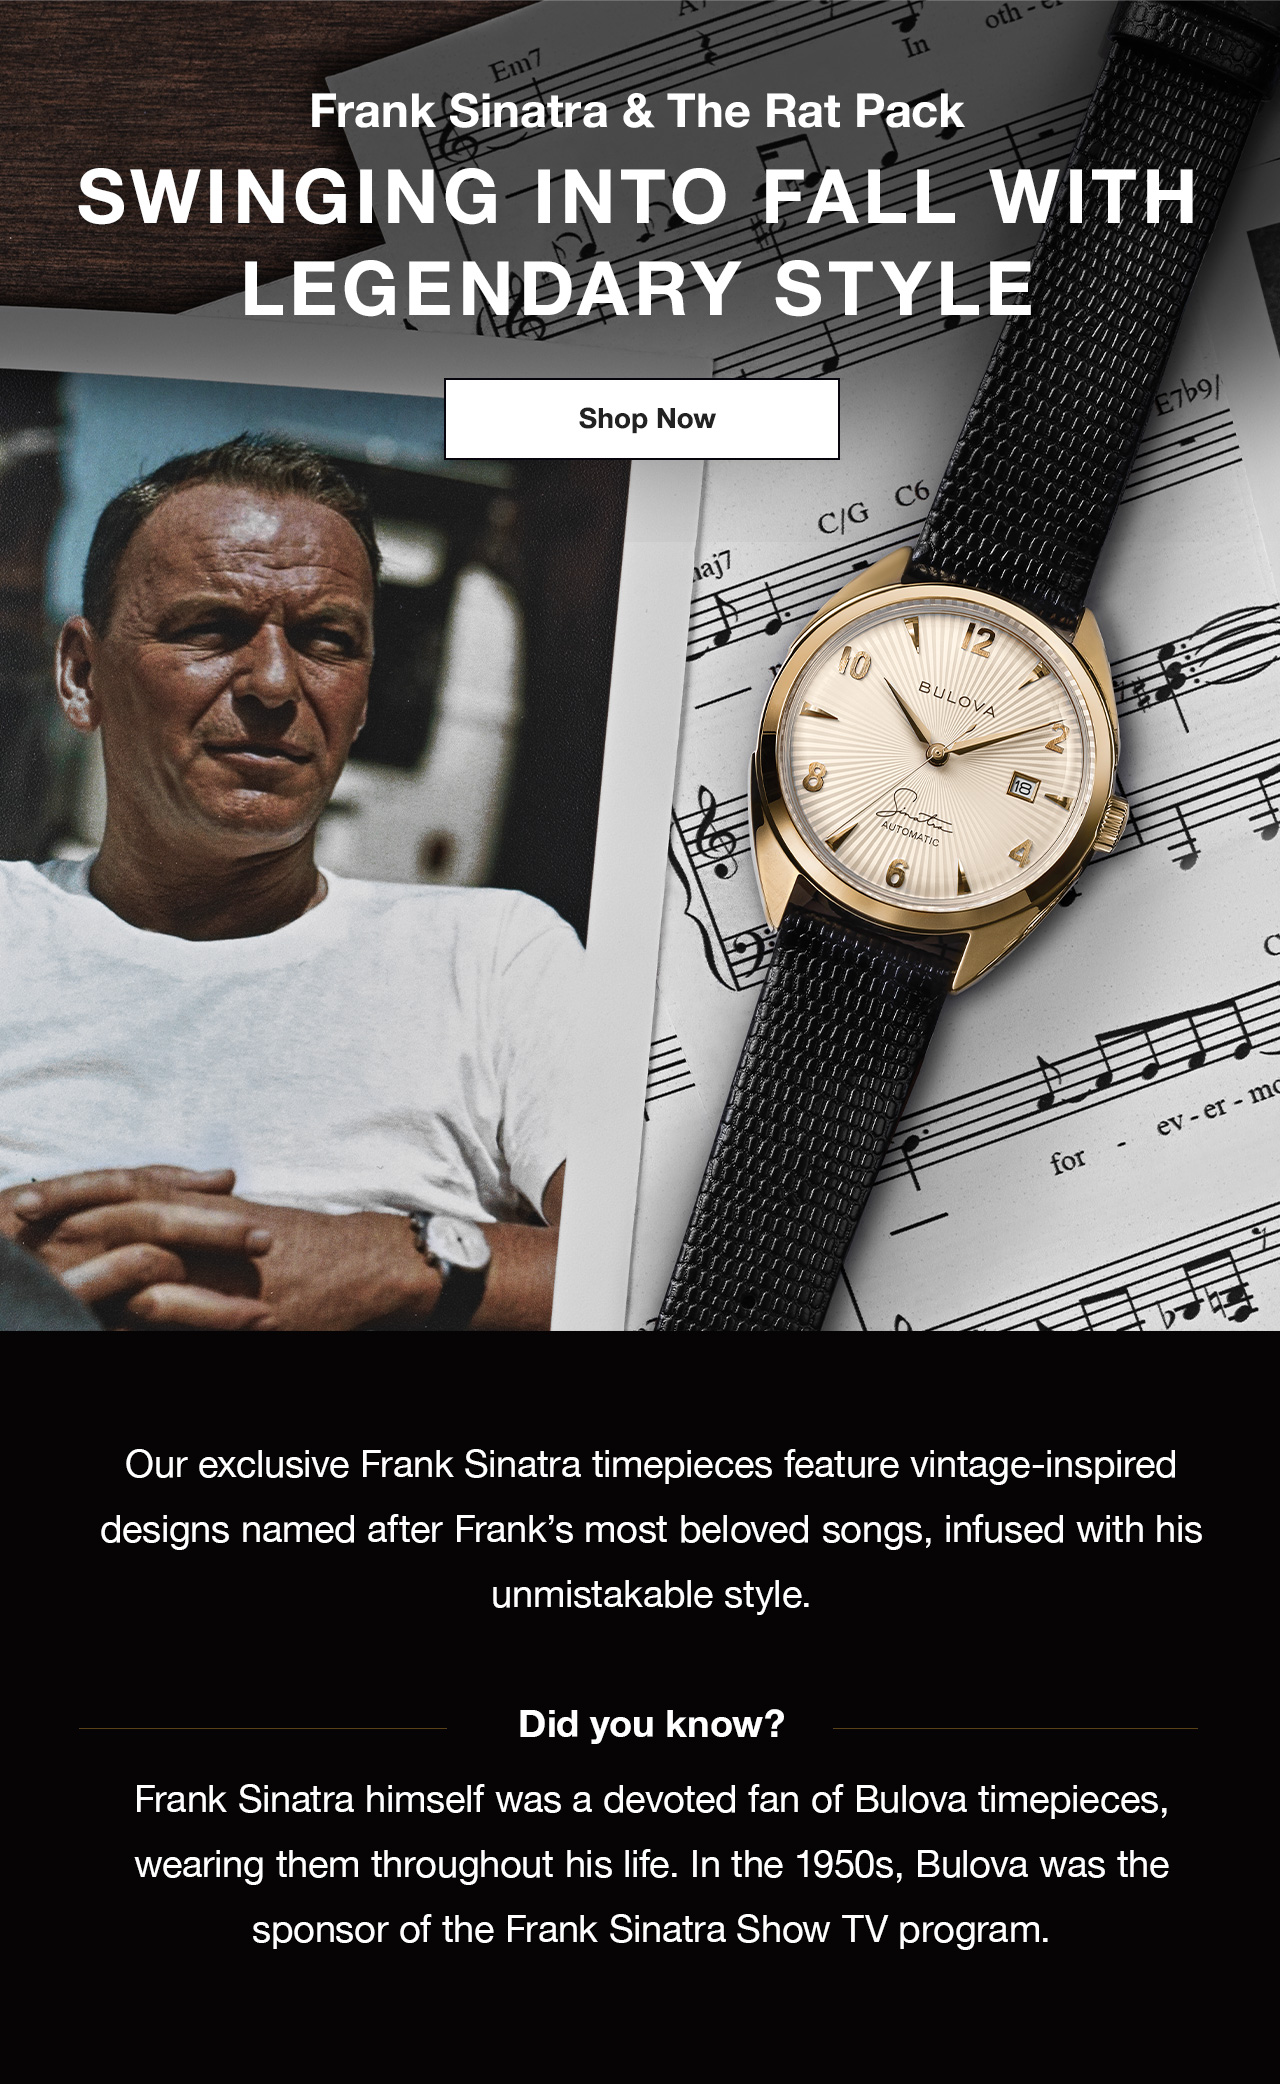 Frank Sinatra & The Rat Pack. Swinging into fall with legendary style. Our exclusive Frank Sinatra timepieces feature vintage-inspired designs named after Frank’s most beloved songs, infused with his unmistakable style.   Did you know?  Frank Sinatra himself was a devoted fan of Bulova timepieces, wearing them throughout his life. In the 1950s, Bulova was the sponsor of the Frank Sinatra Show TV program.